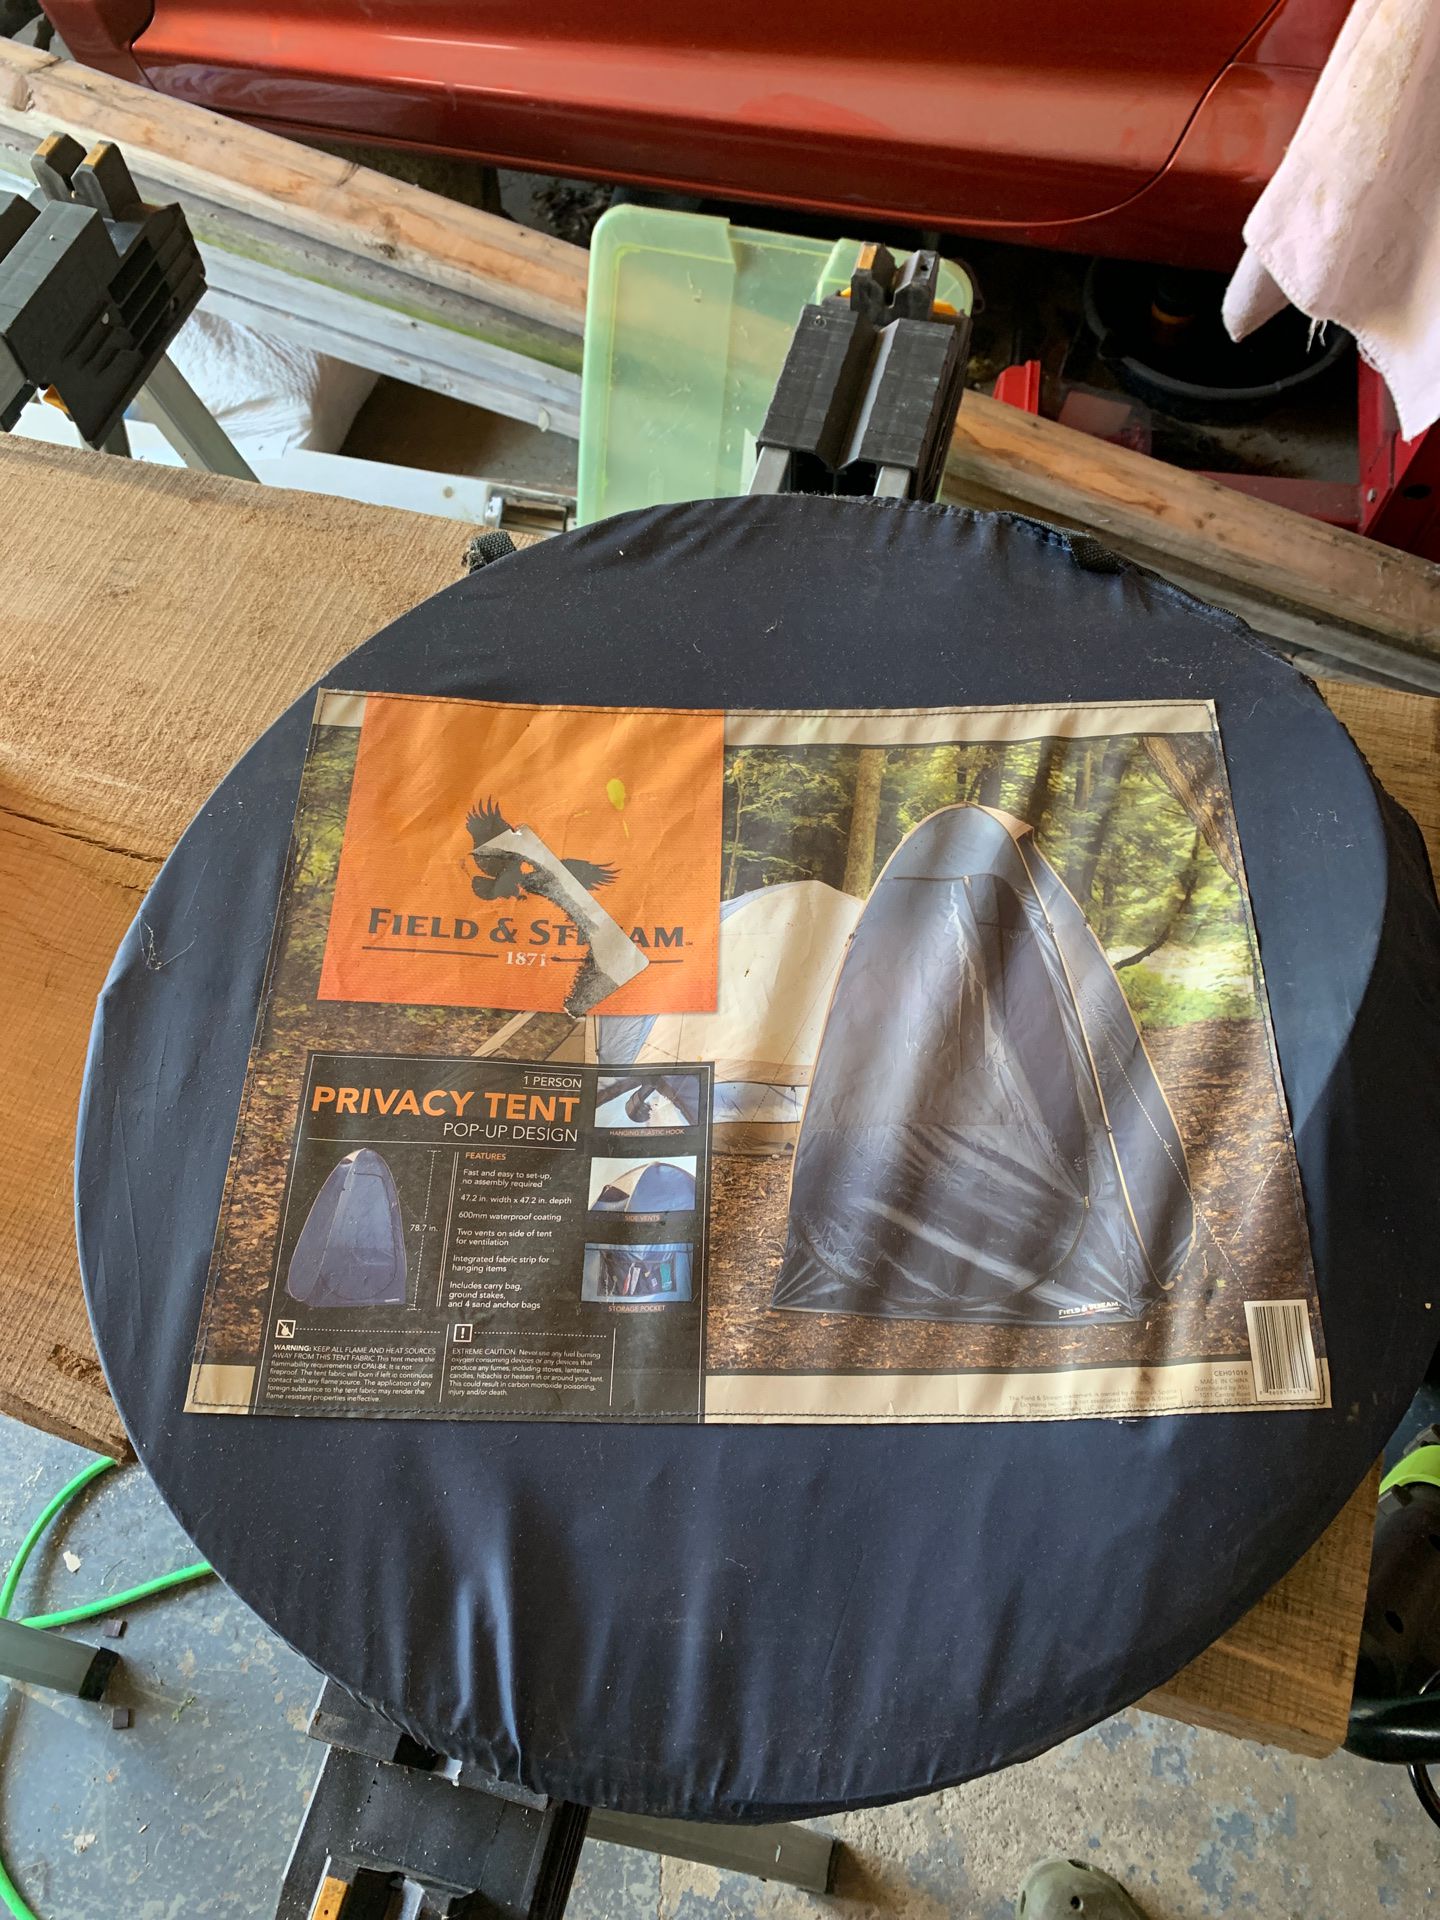 Privacy tent for camping